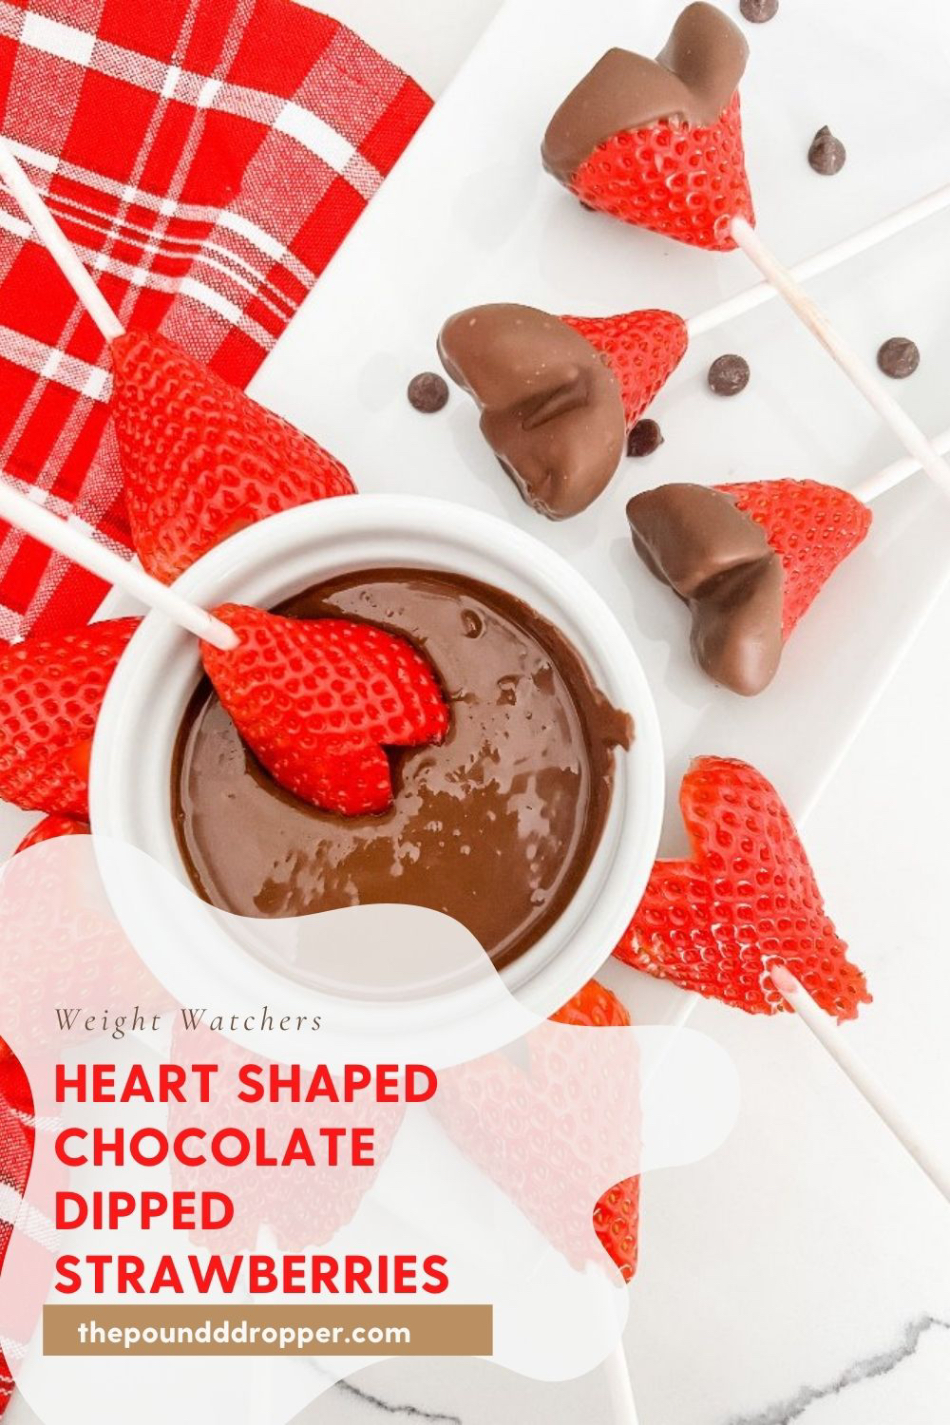 Sugar Free Heart Shaped Chocolate Dipped Strawberries using from fresh strawberries and no sugar added milk chocolate chips! In just a few minutes you can transform a few strawberries into a Valentine treat that can be enjoyed as-is, or dipped in chocolate! via @pounddropper